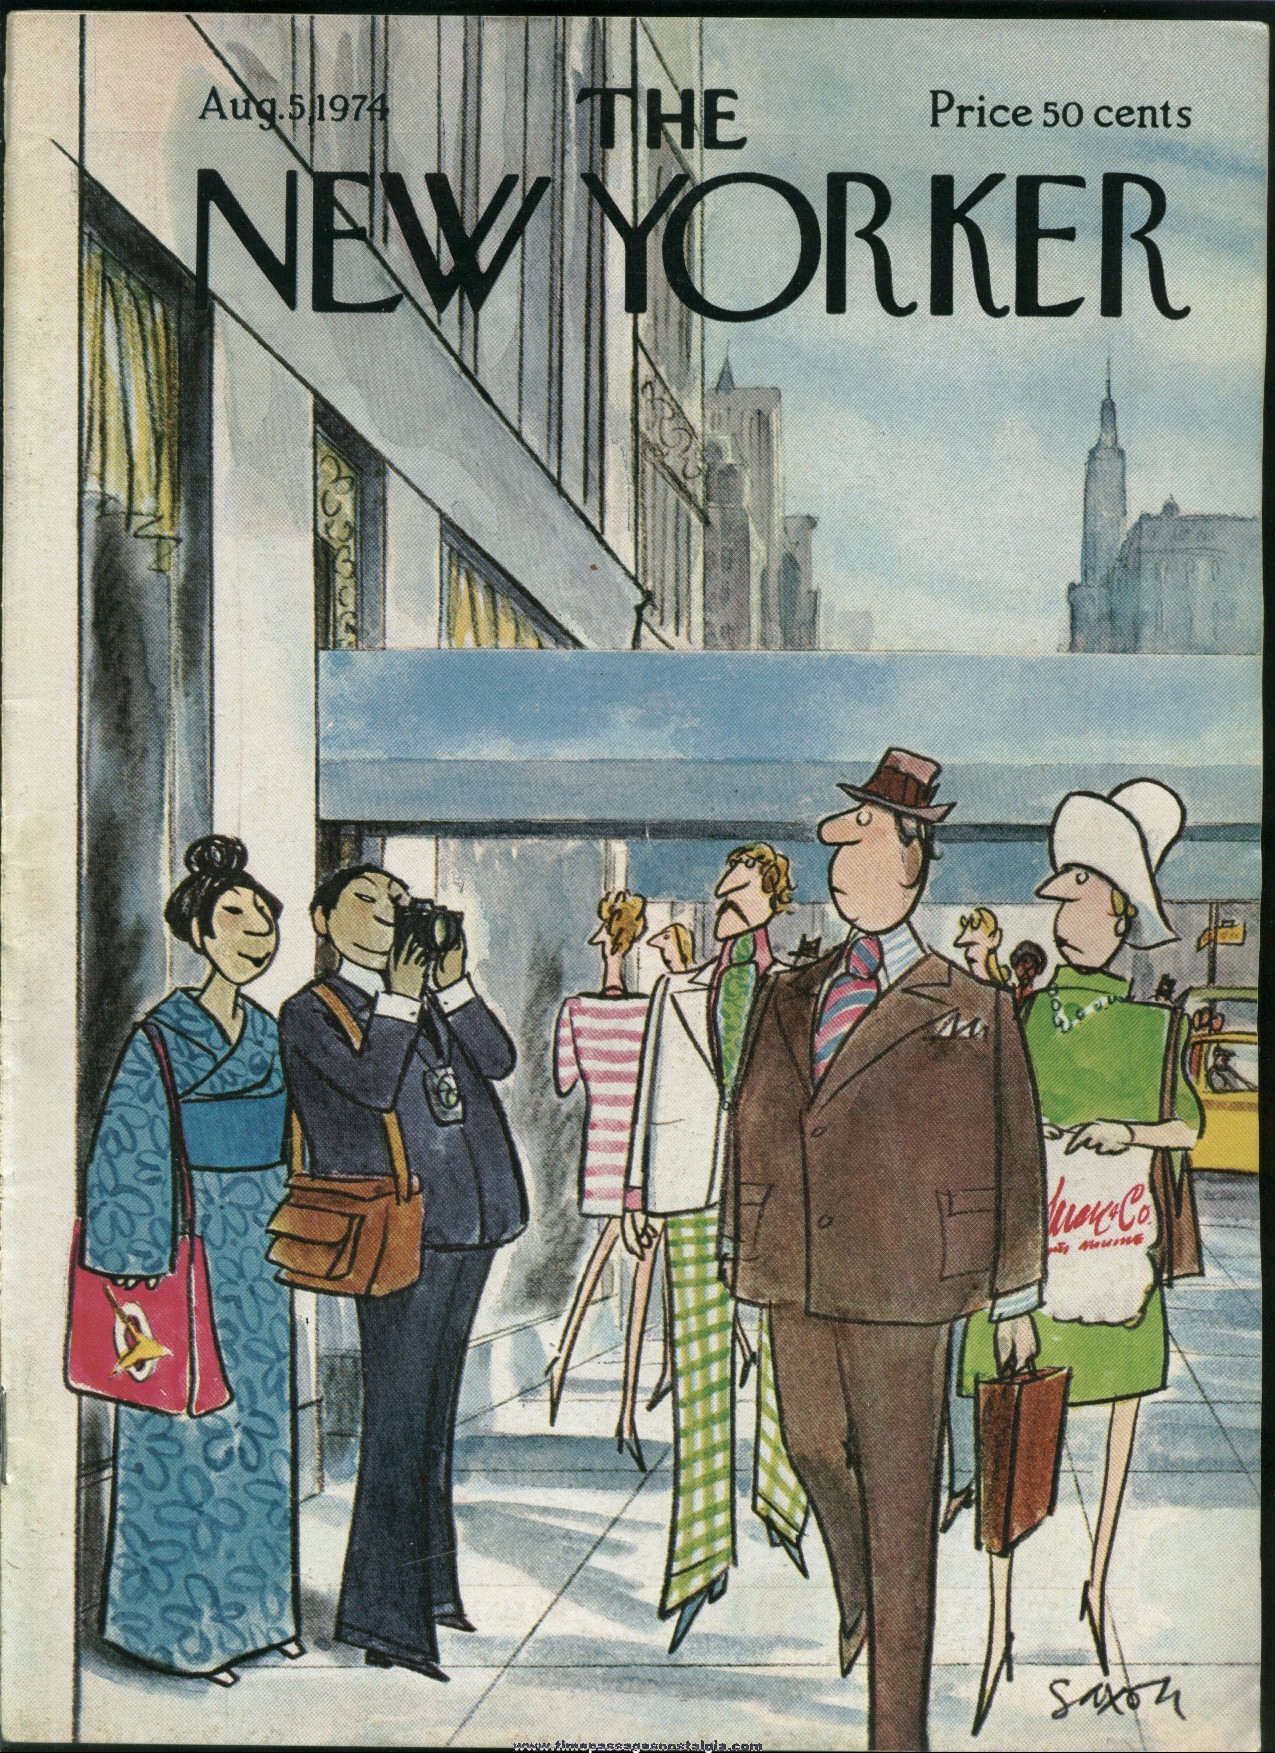 New Yorker Magazine - August 5, 1974 - Cover by Charles Saxon